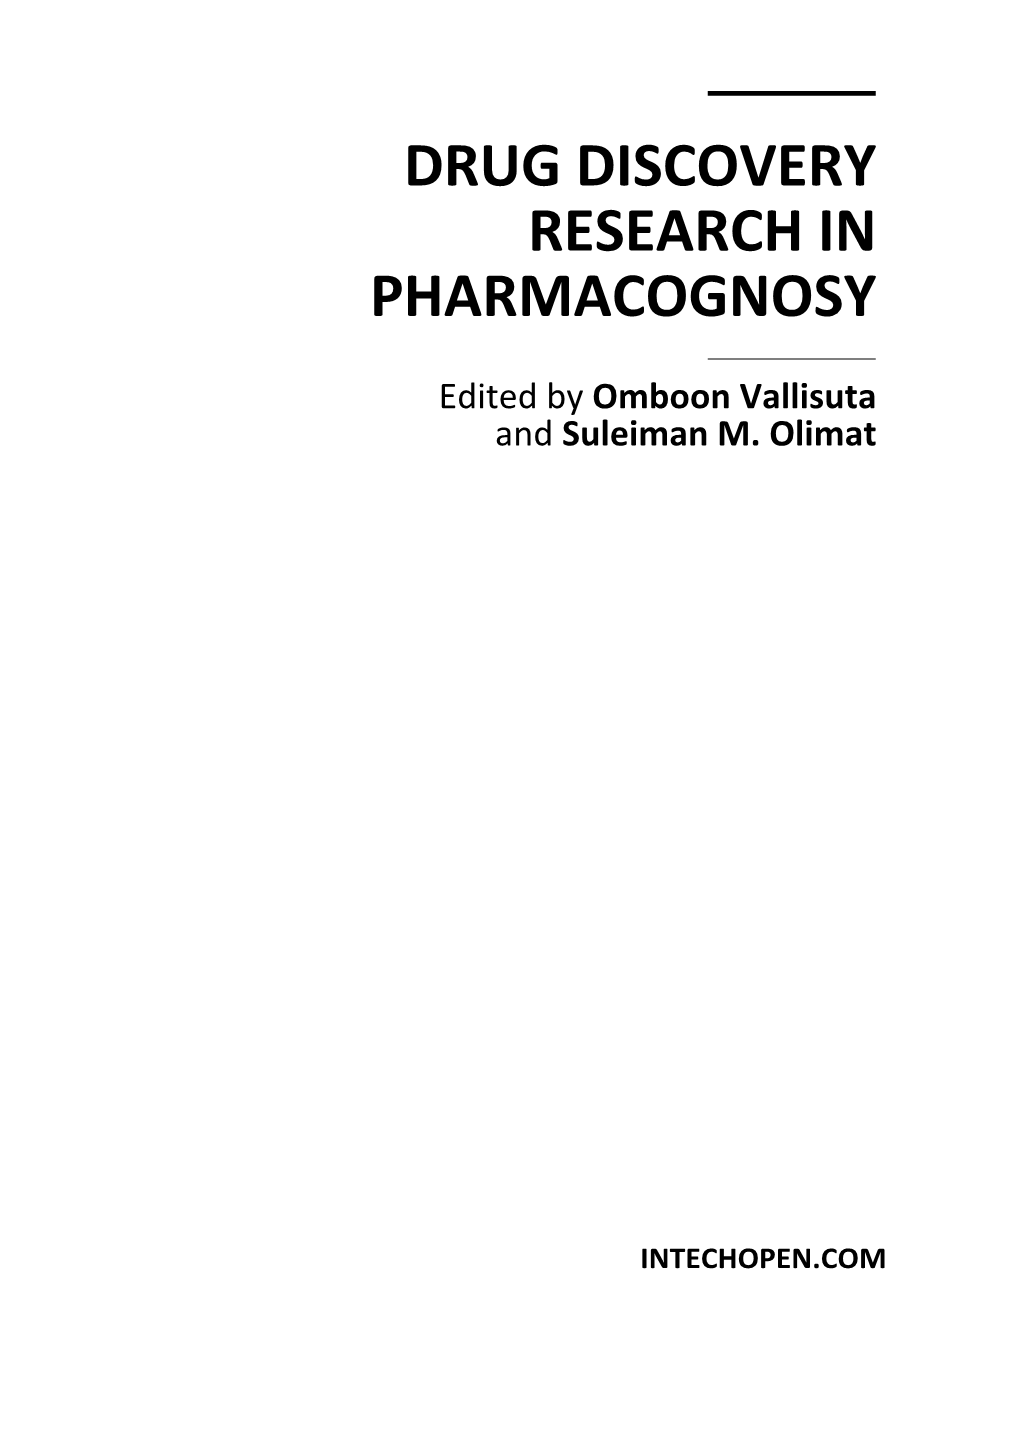 Drug Discovery Research in Pharmacognosy